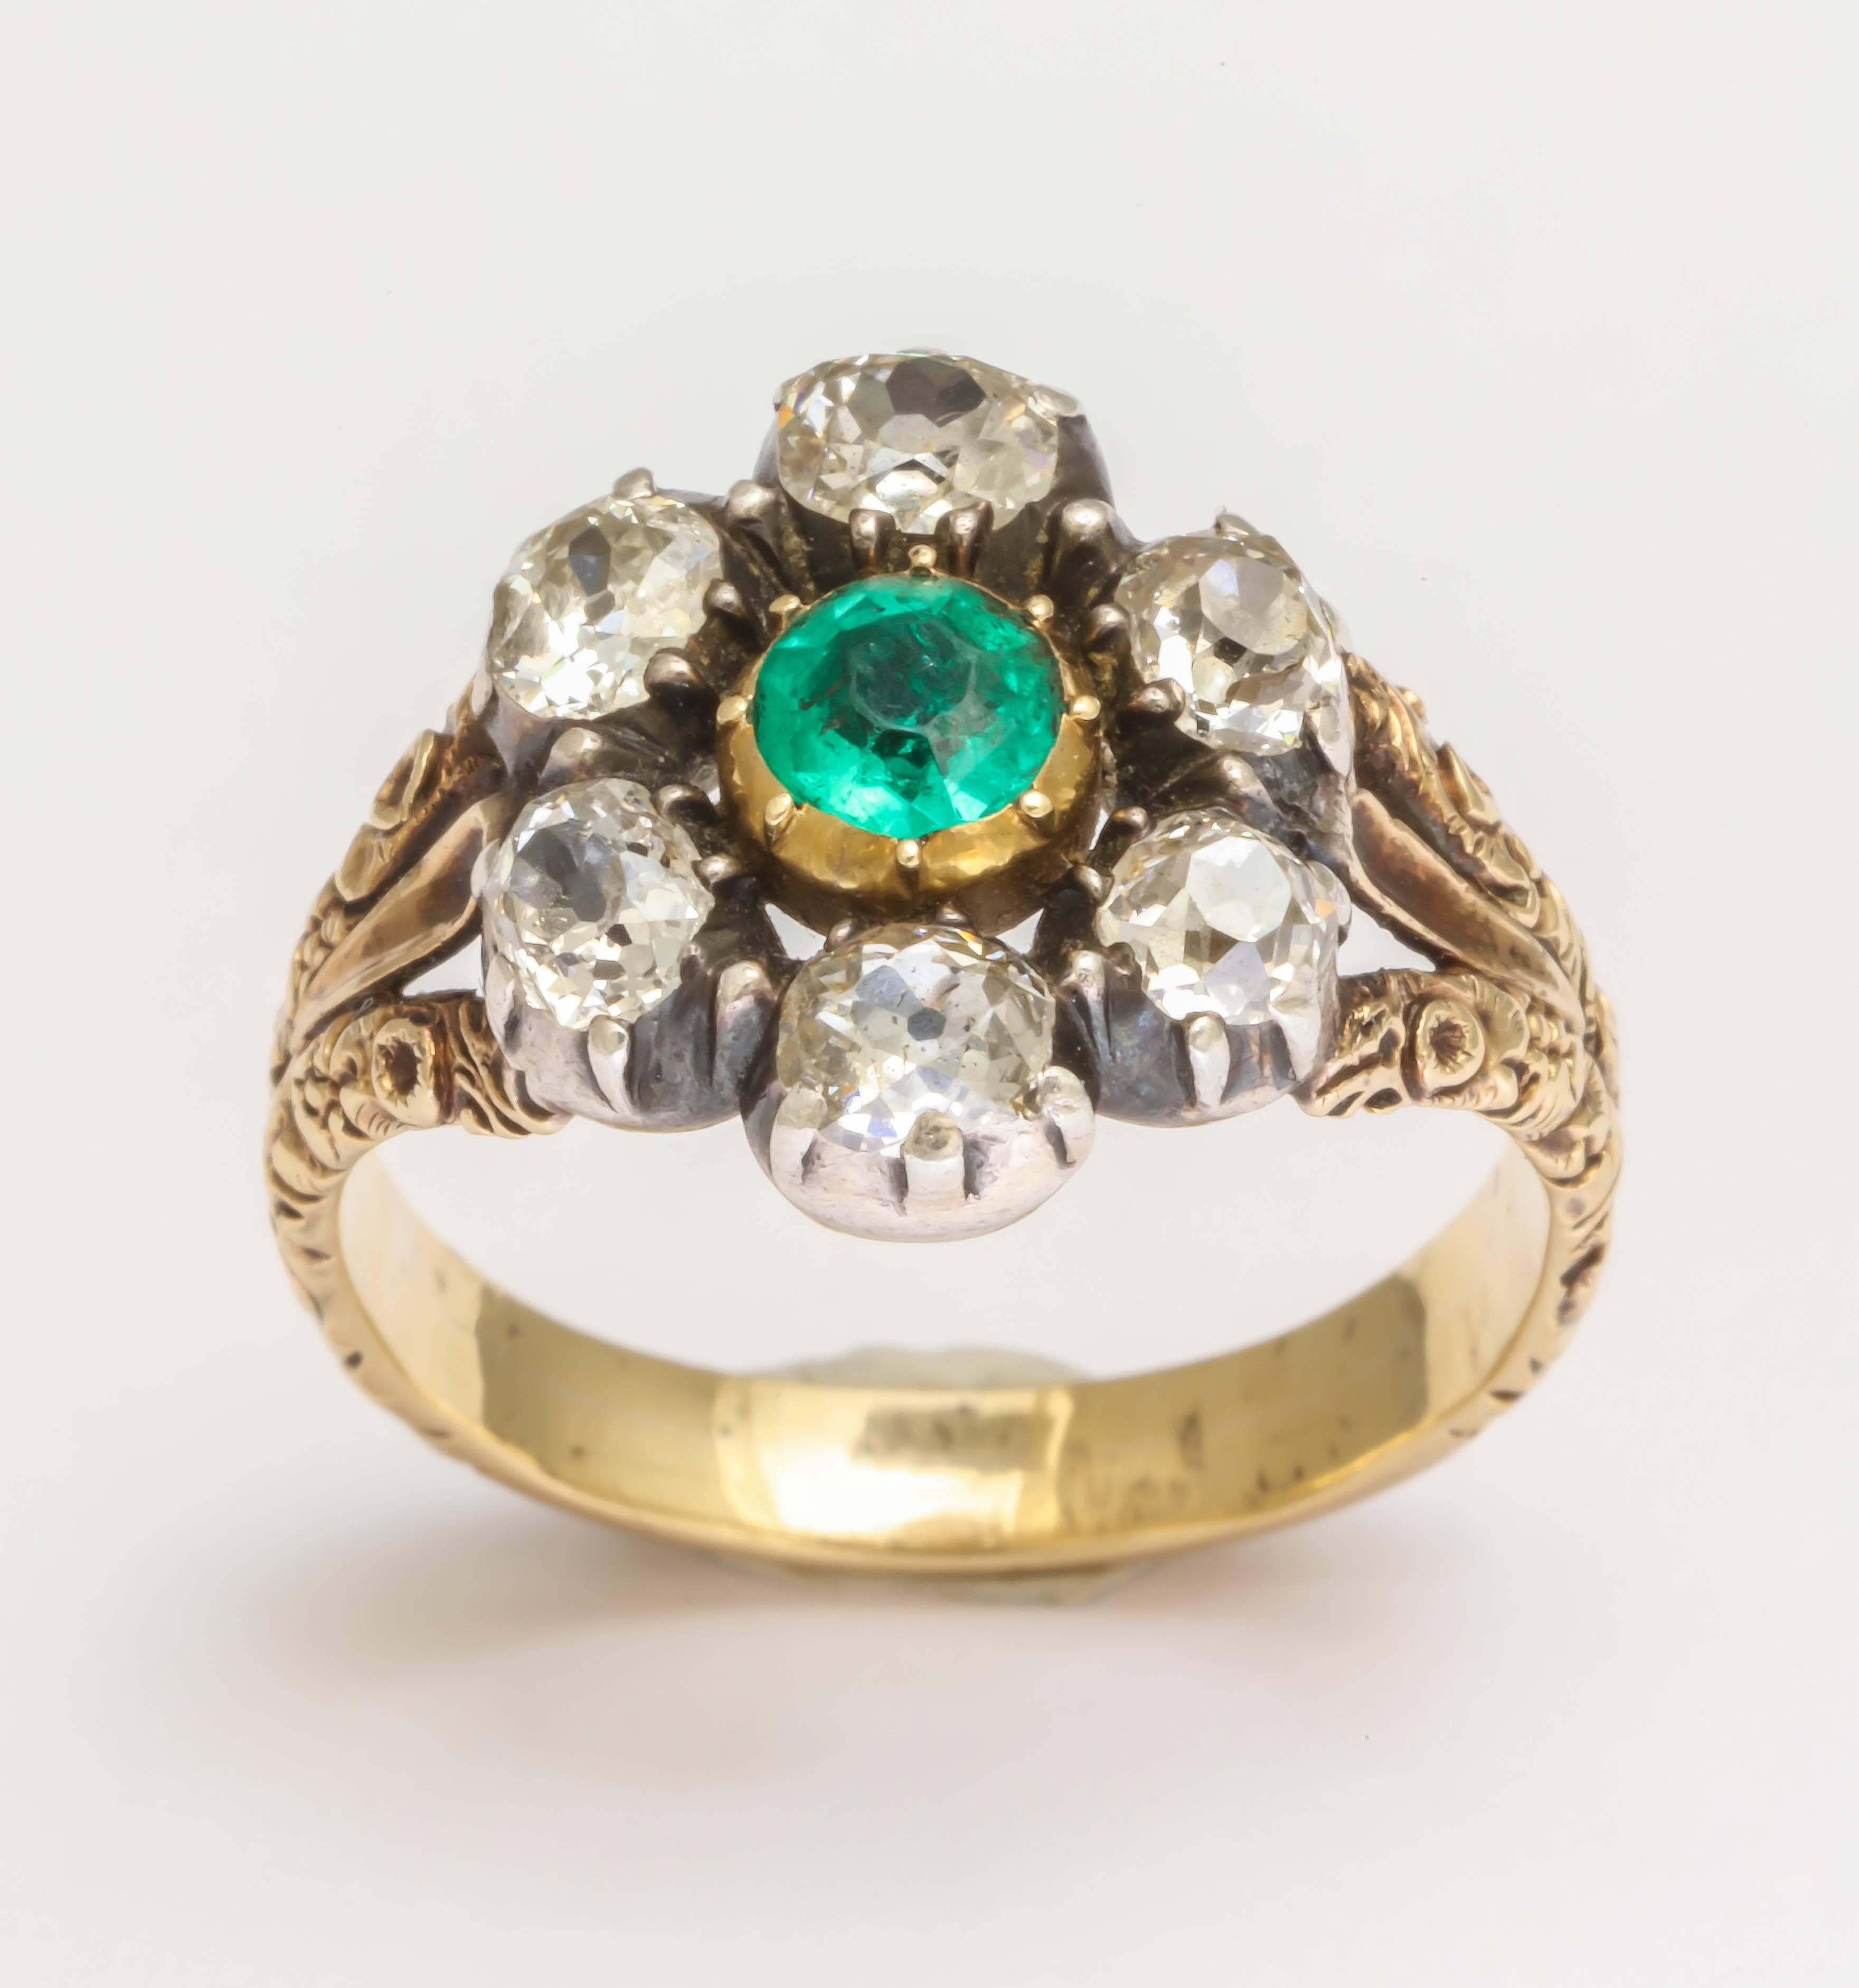 Gorgeous emerald is surrounded by six old mine cut diamonds in a cluster closed back setting. The mount has lovely split shoulders with engraving throughout. Silver over yellow gold, likely made in England. 